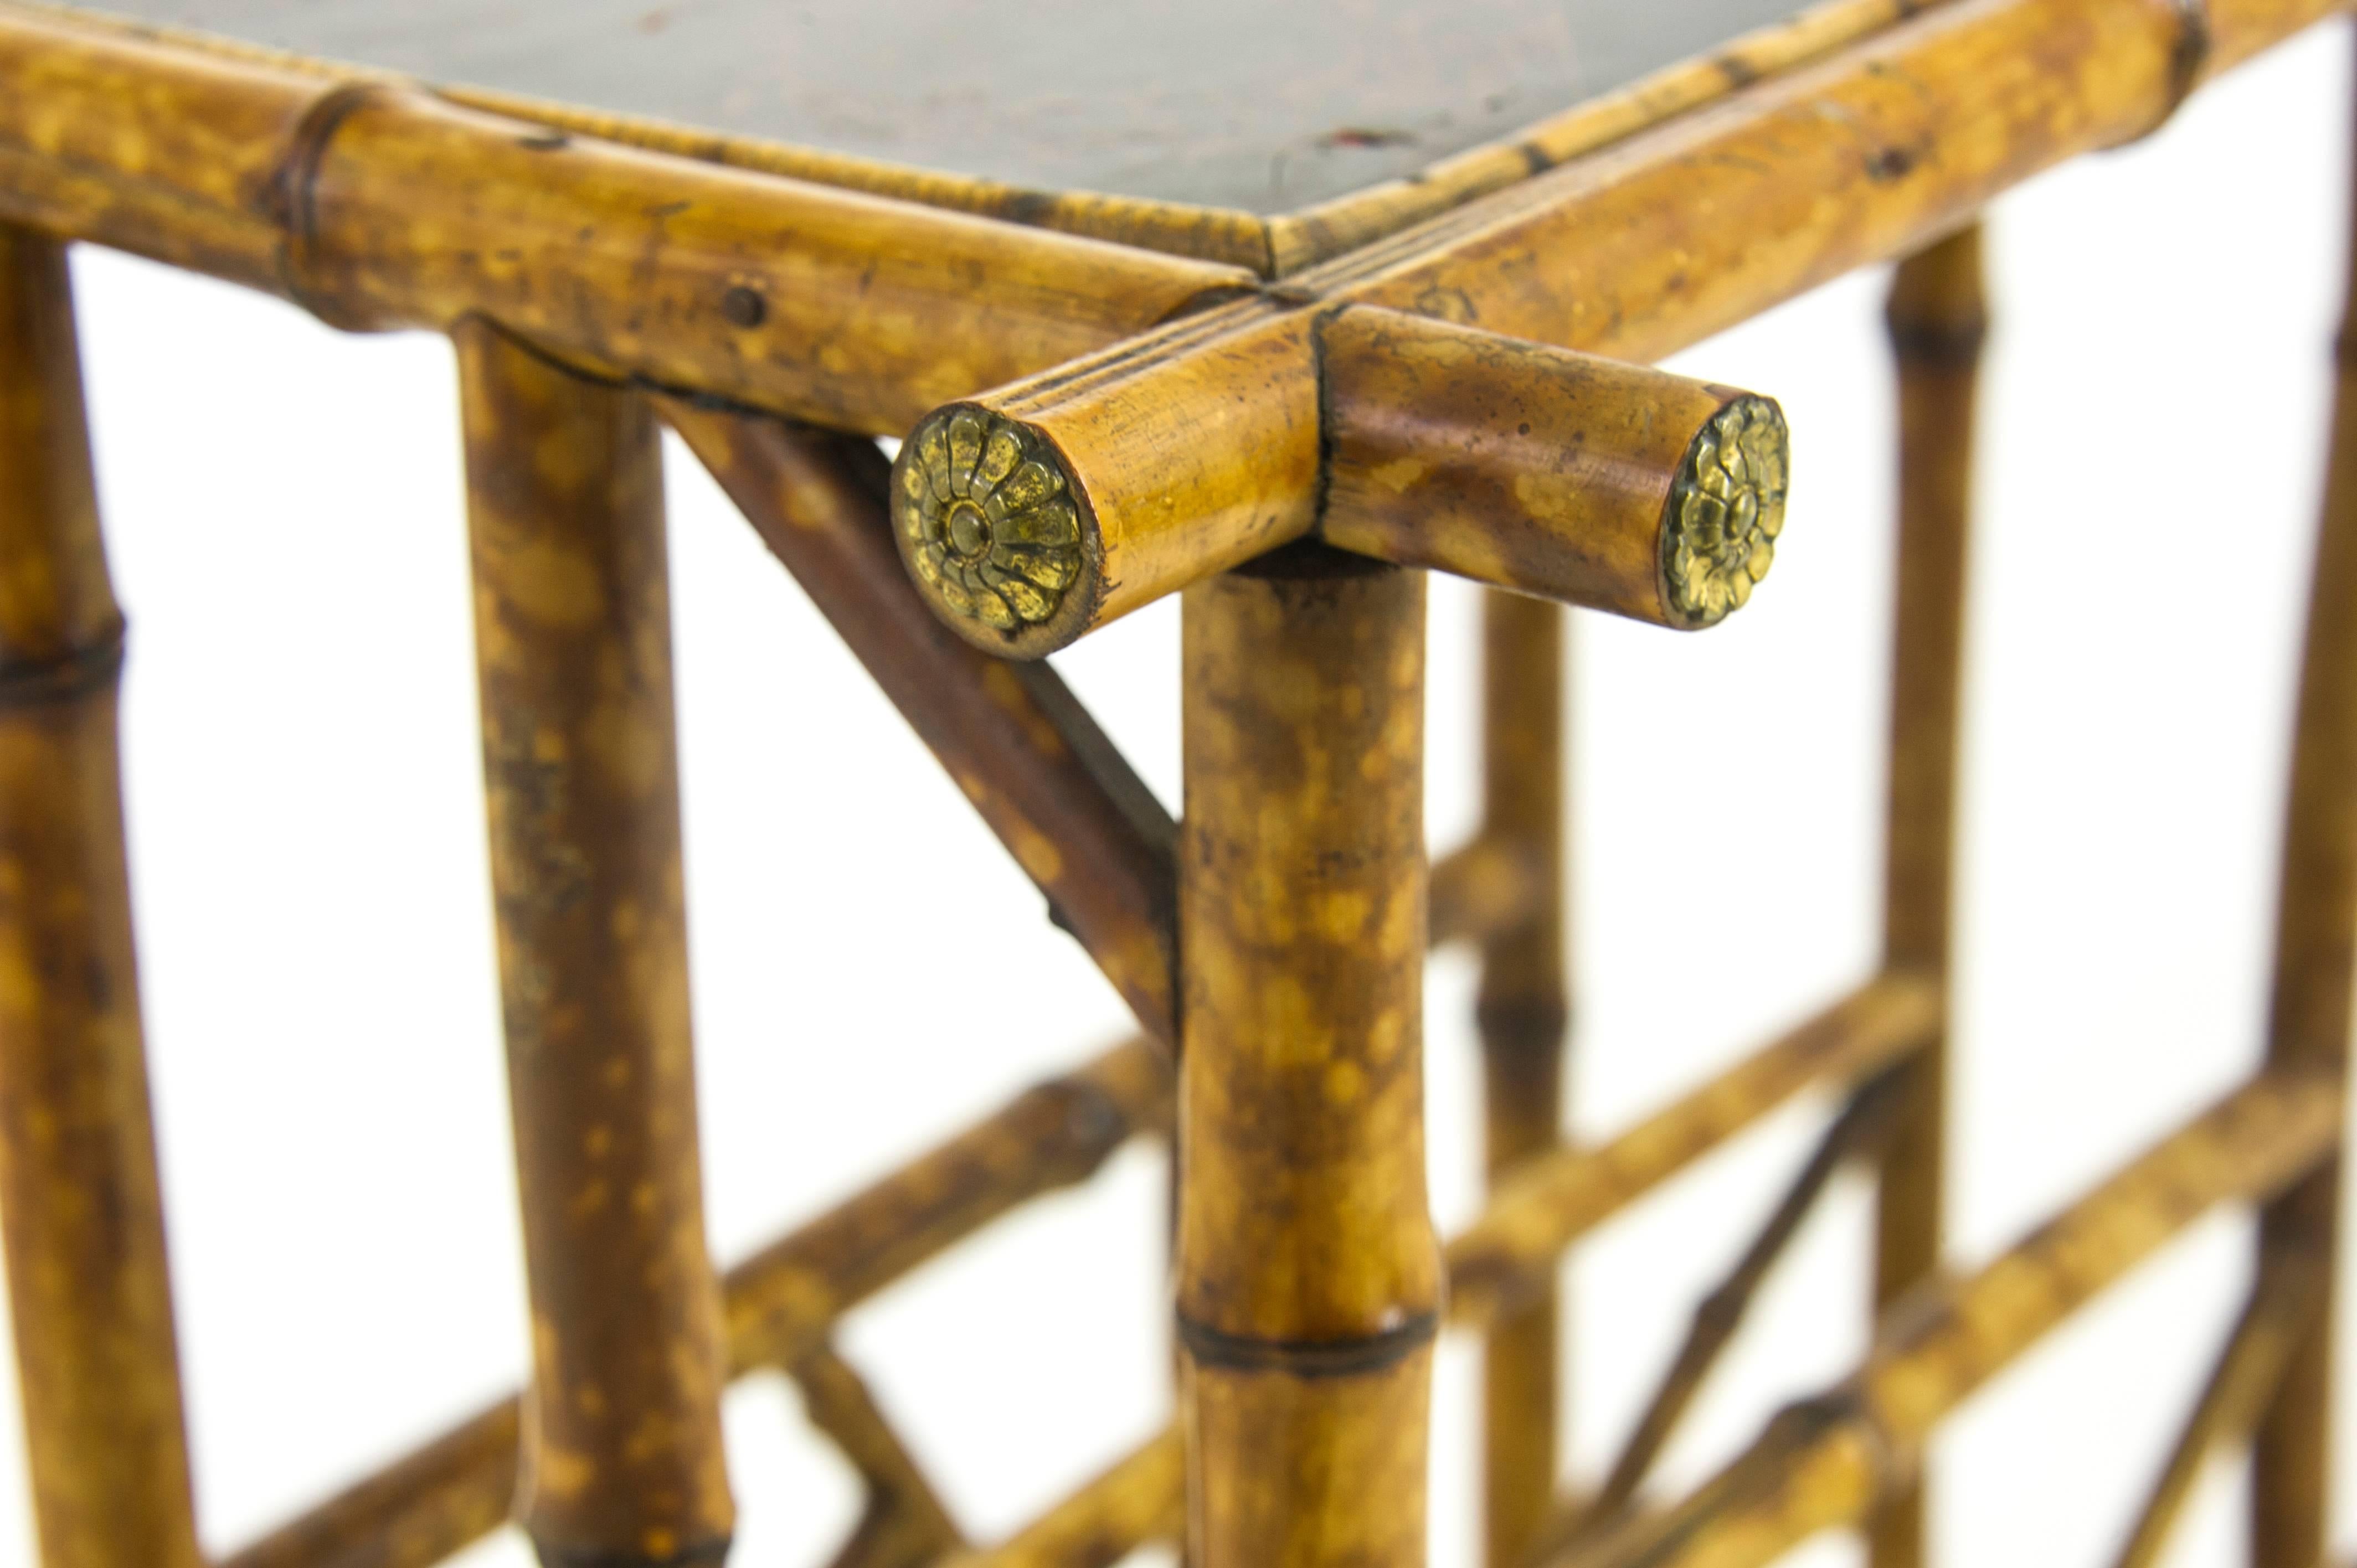 Hand-Crafted Bamboo Furniture, Antique Magazine Rack, Chinoiserie Panels, Scotland, 1880